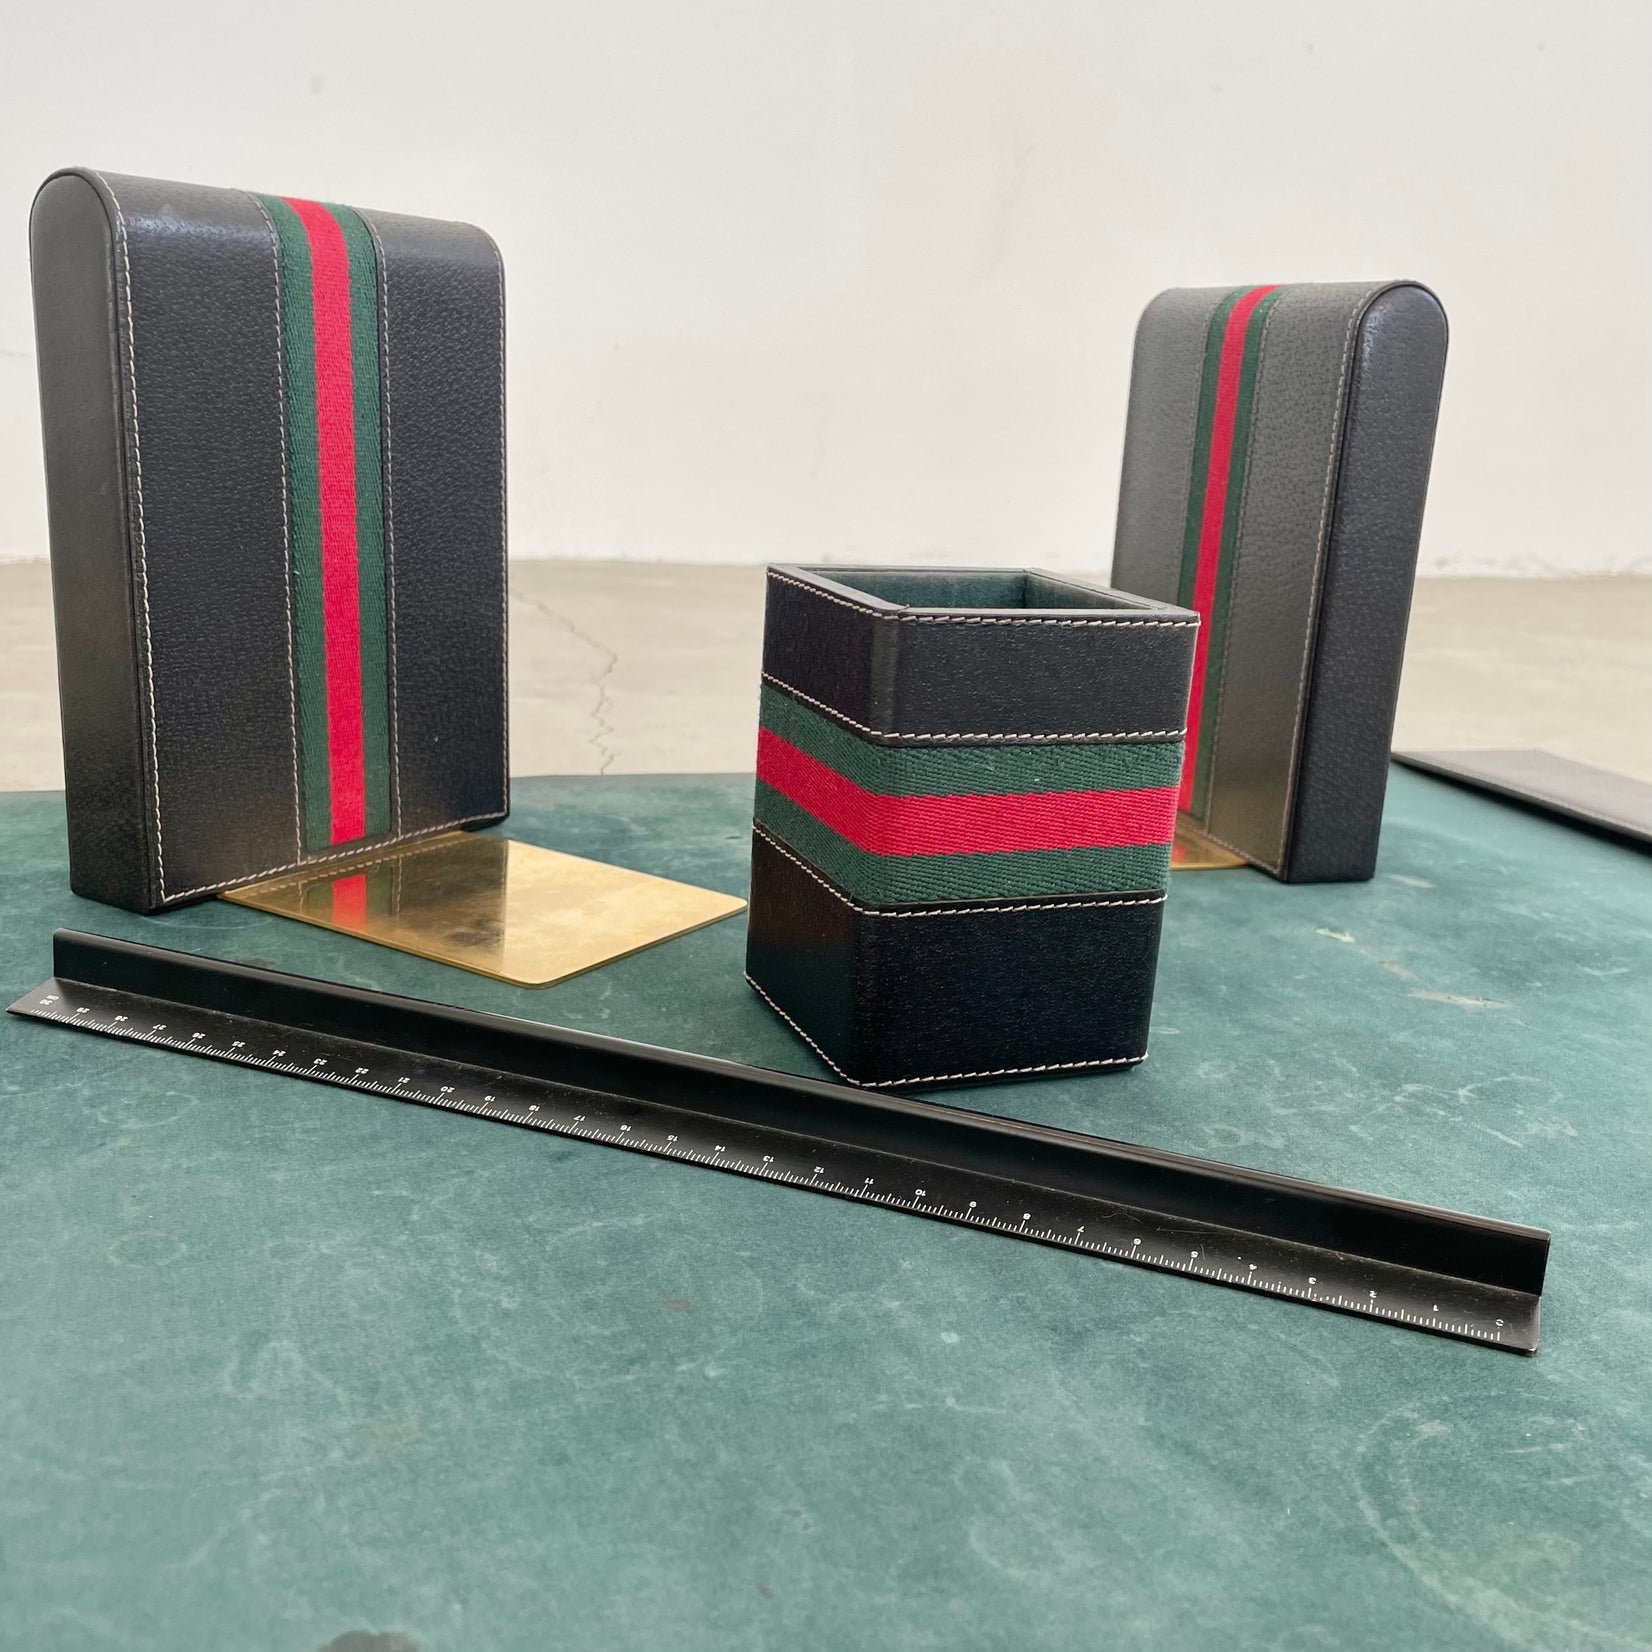 Gucci Leather and Velvet Desk Set, 1980s Italy